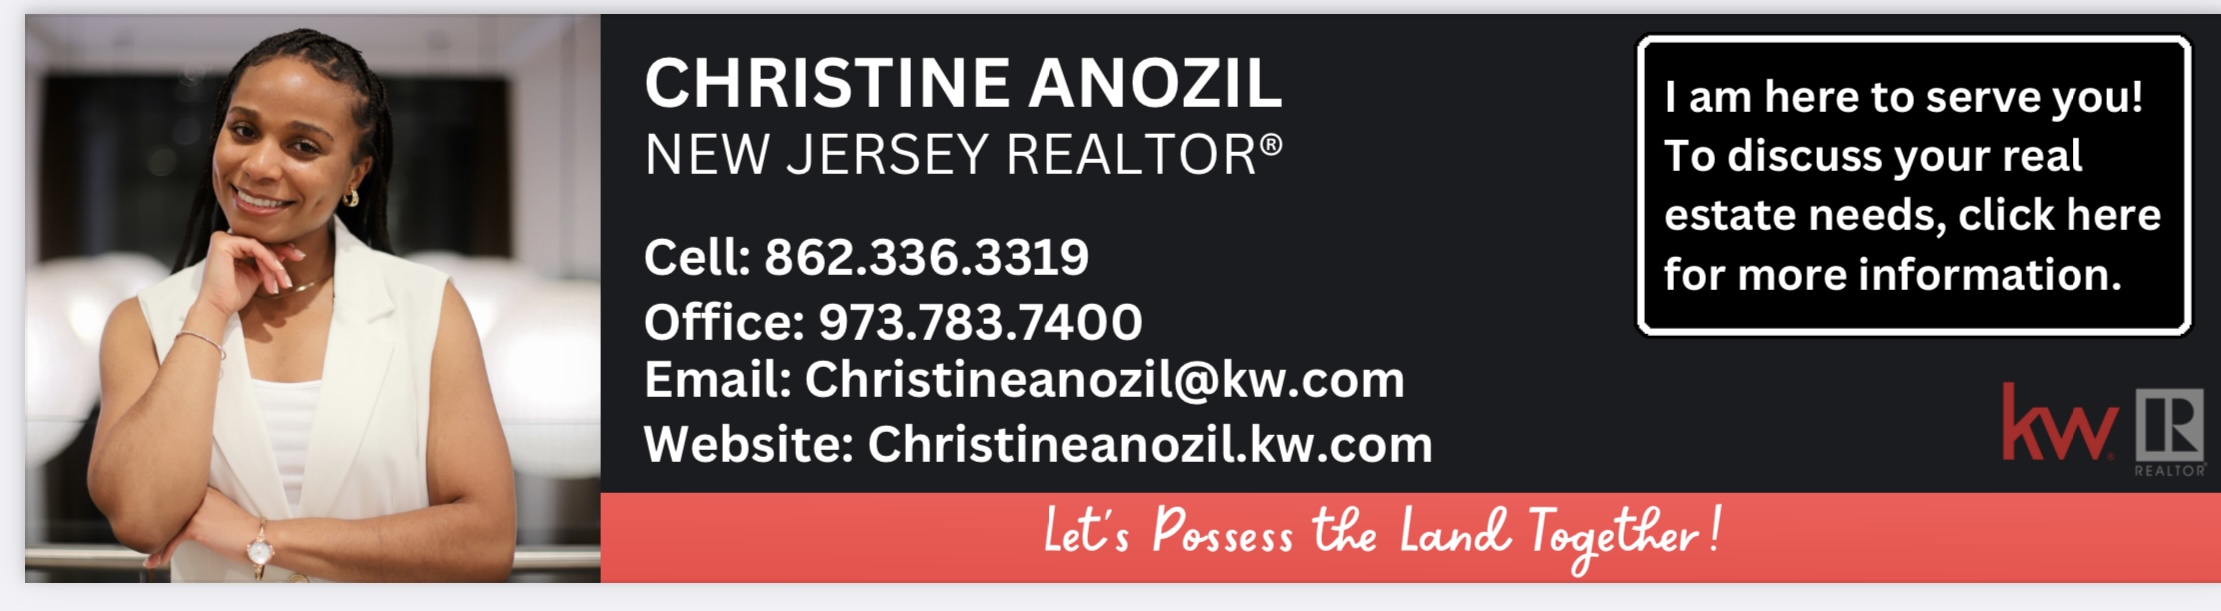 N.J. real estate agency, apartment owner refused to rent to anyone